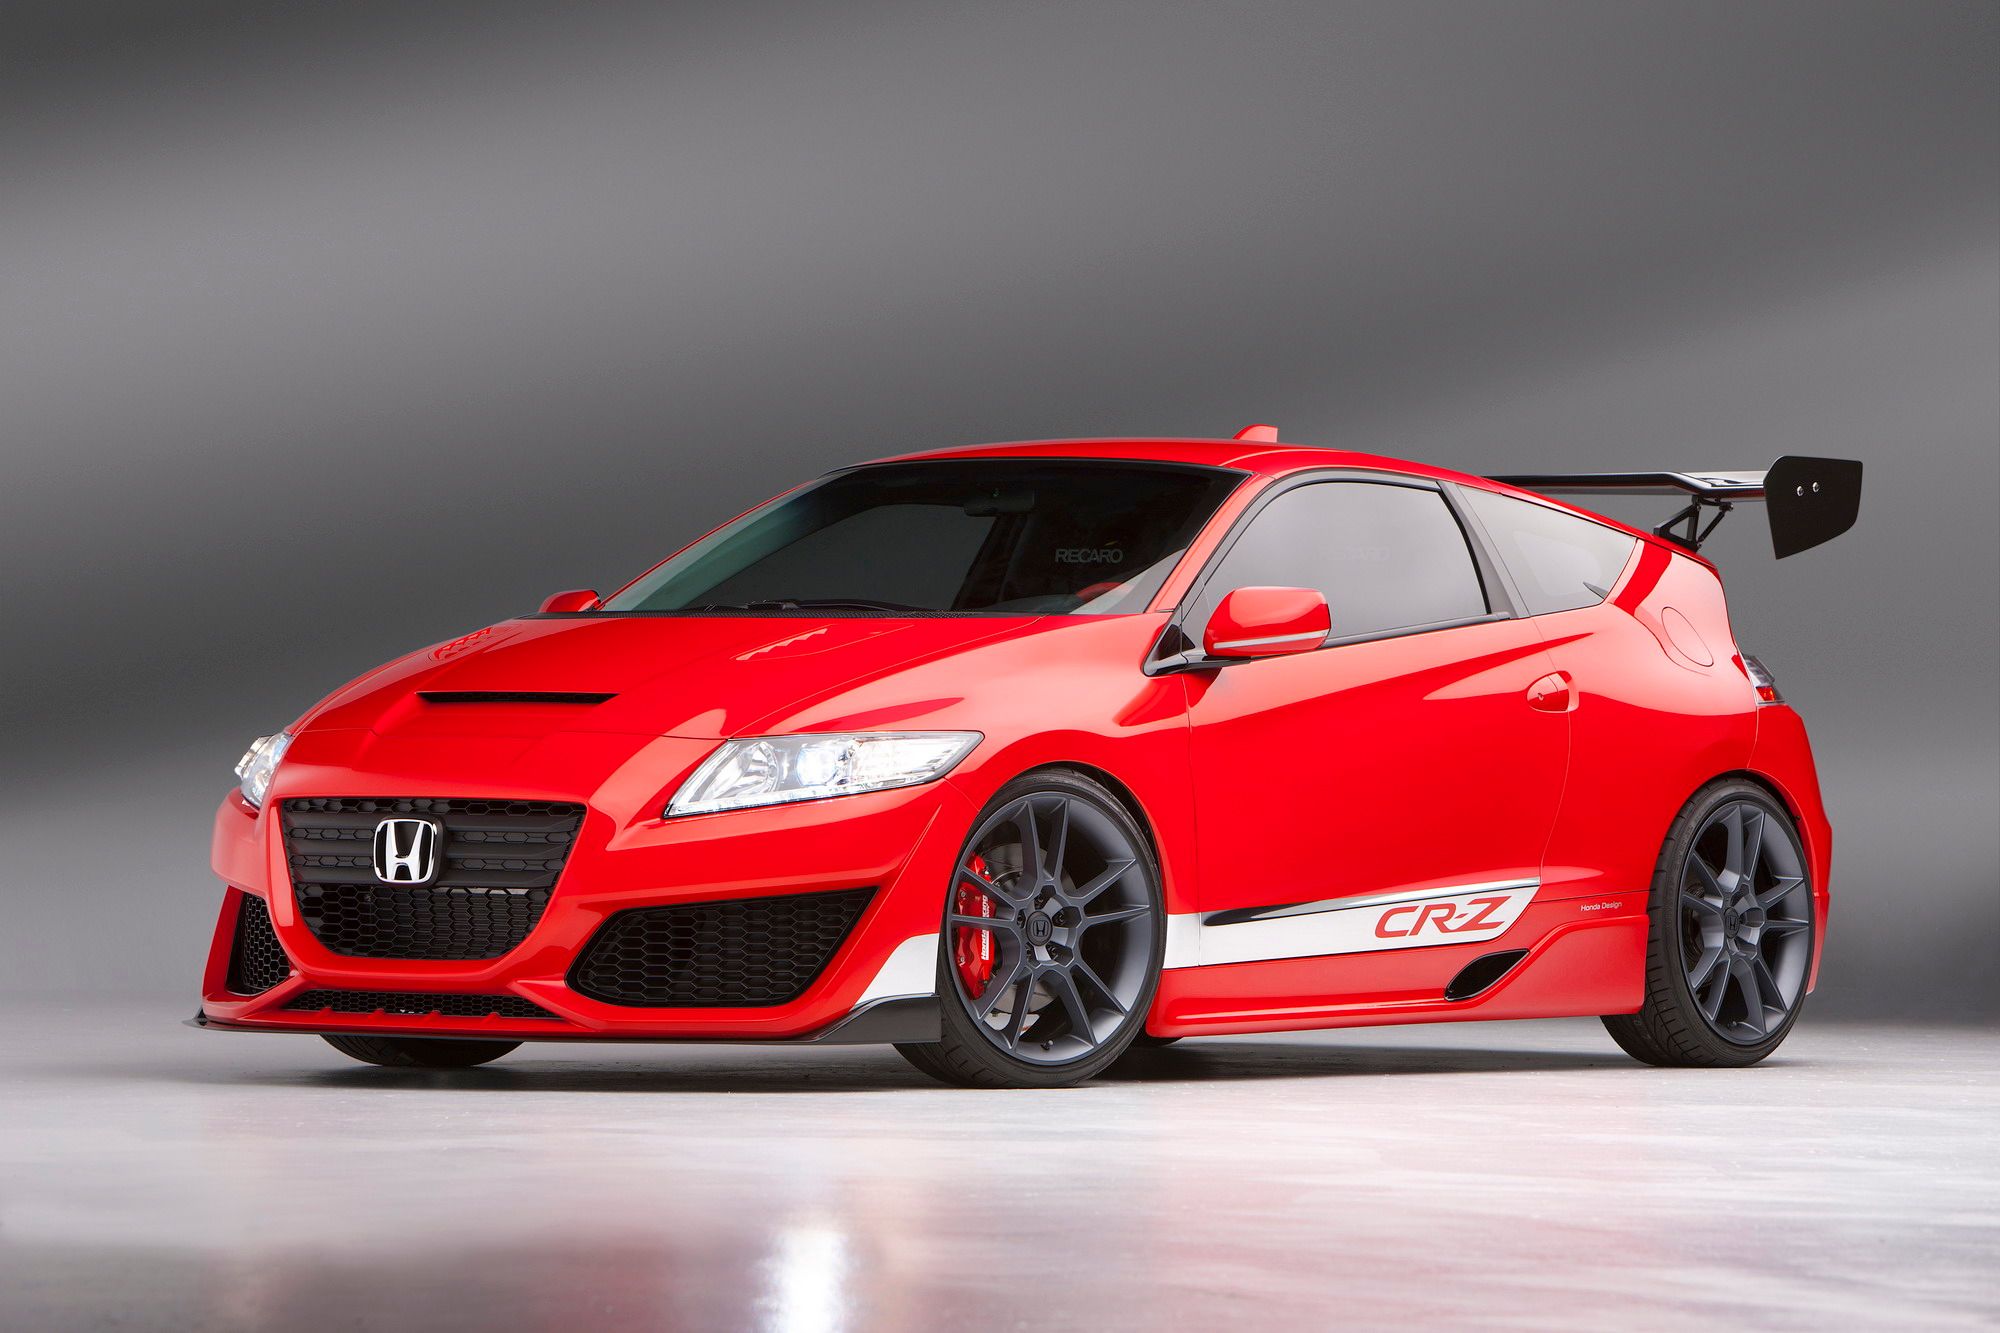 The CR-Z Is A Seriously Underrated Honda, News